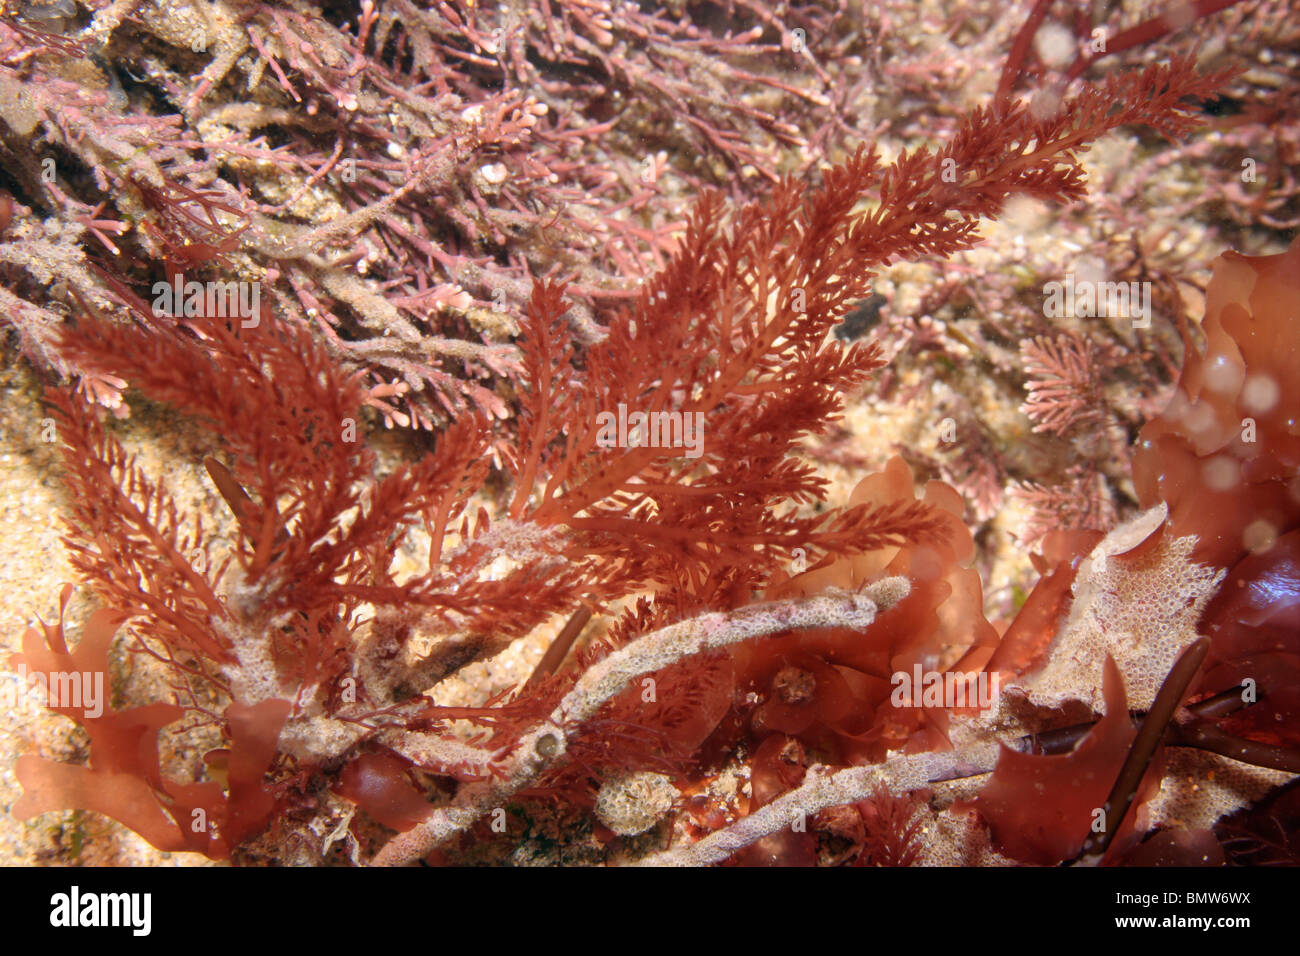 A red seaweed (Lomentaria clavellosa) in a rockpool, UK. Stock Photo